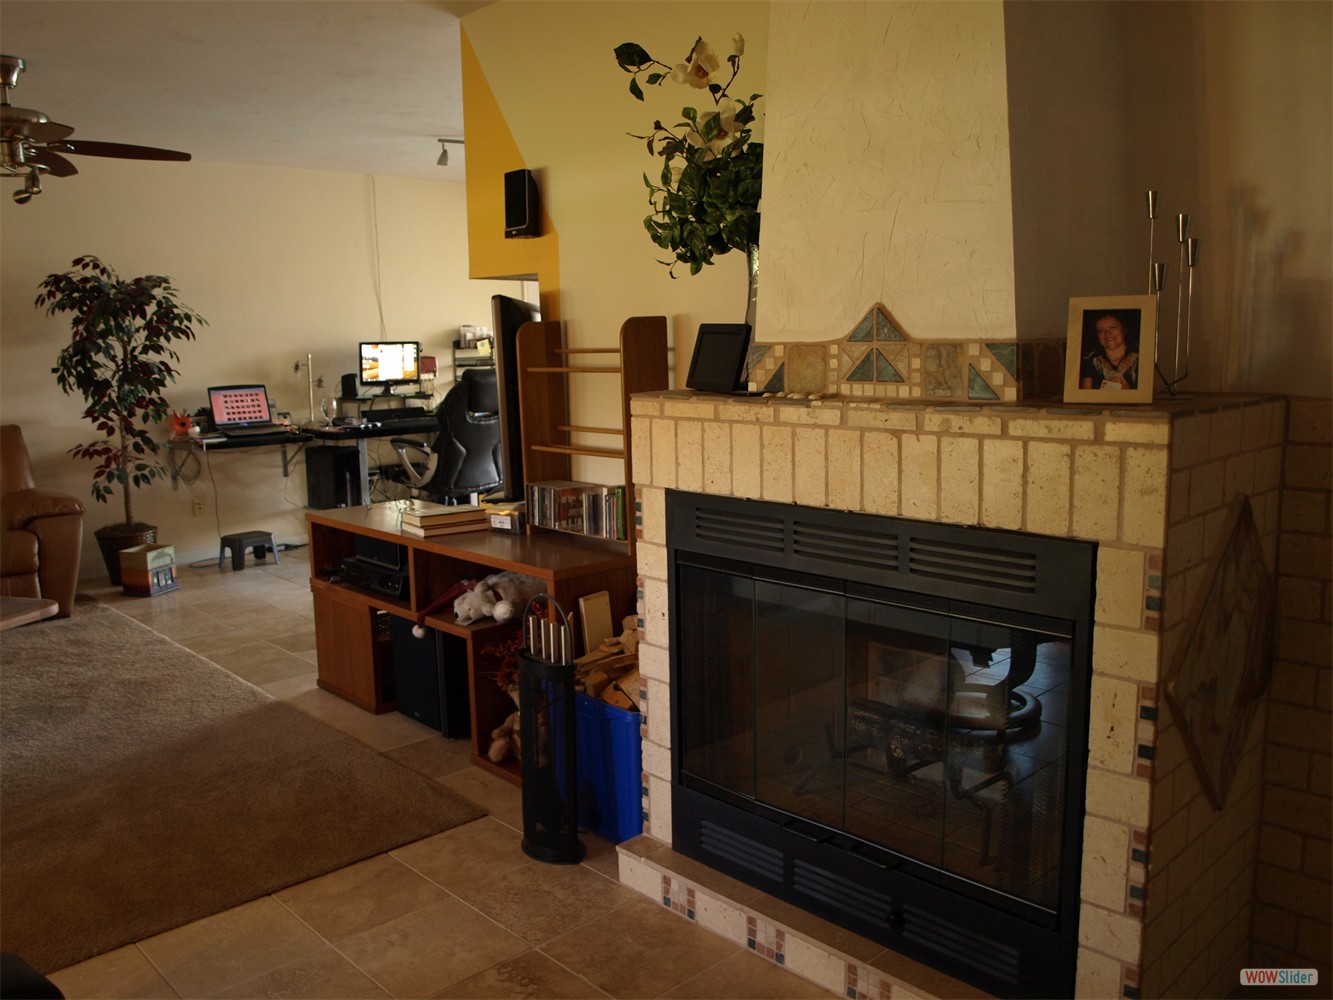 To avoid a fire the carpet in front of the fireplace had to be removed.